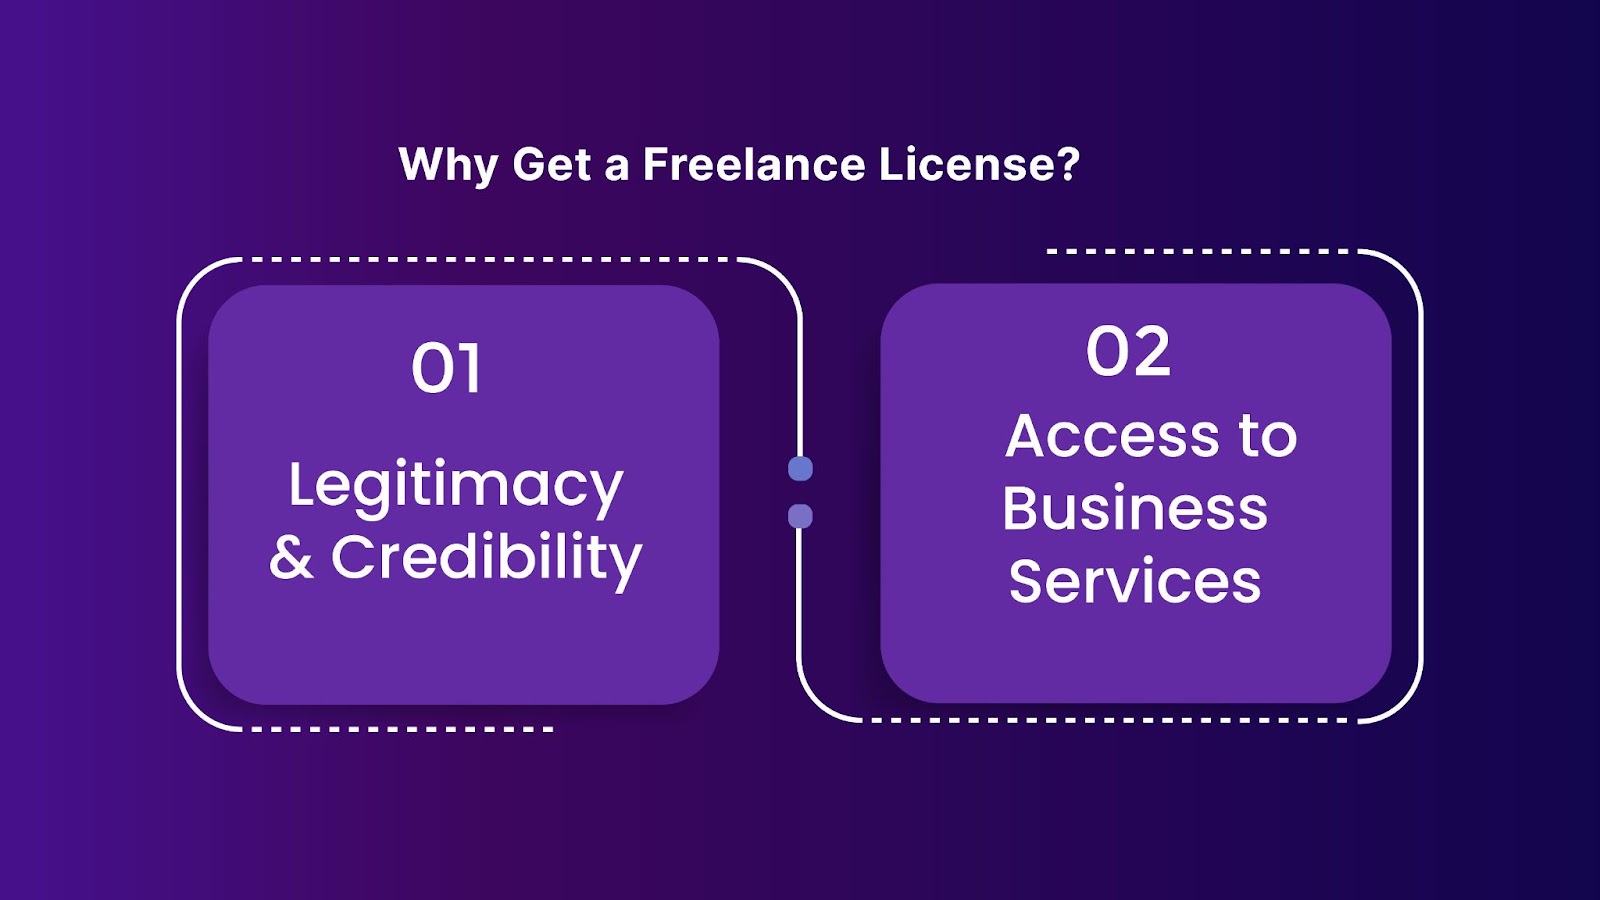 Why Get a Freelance License?